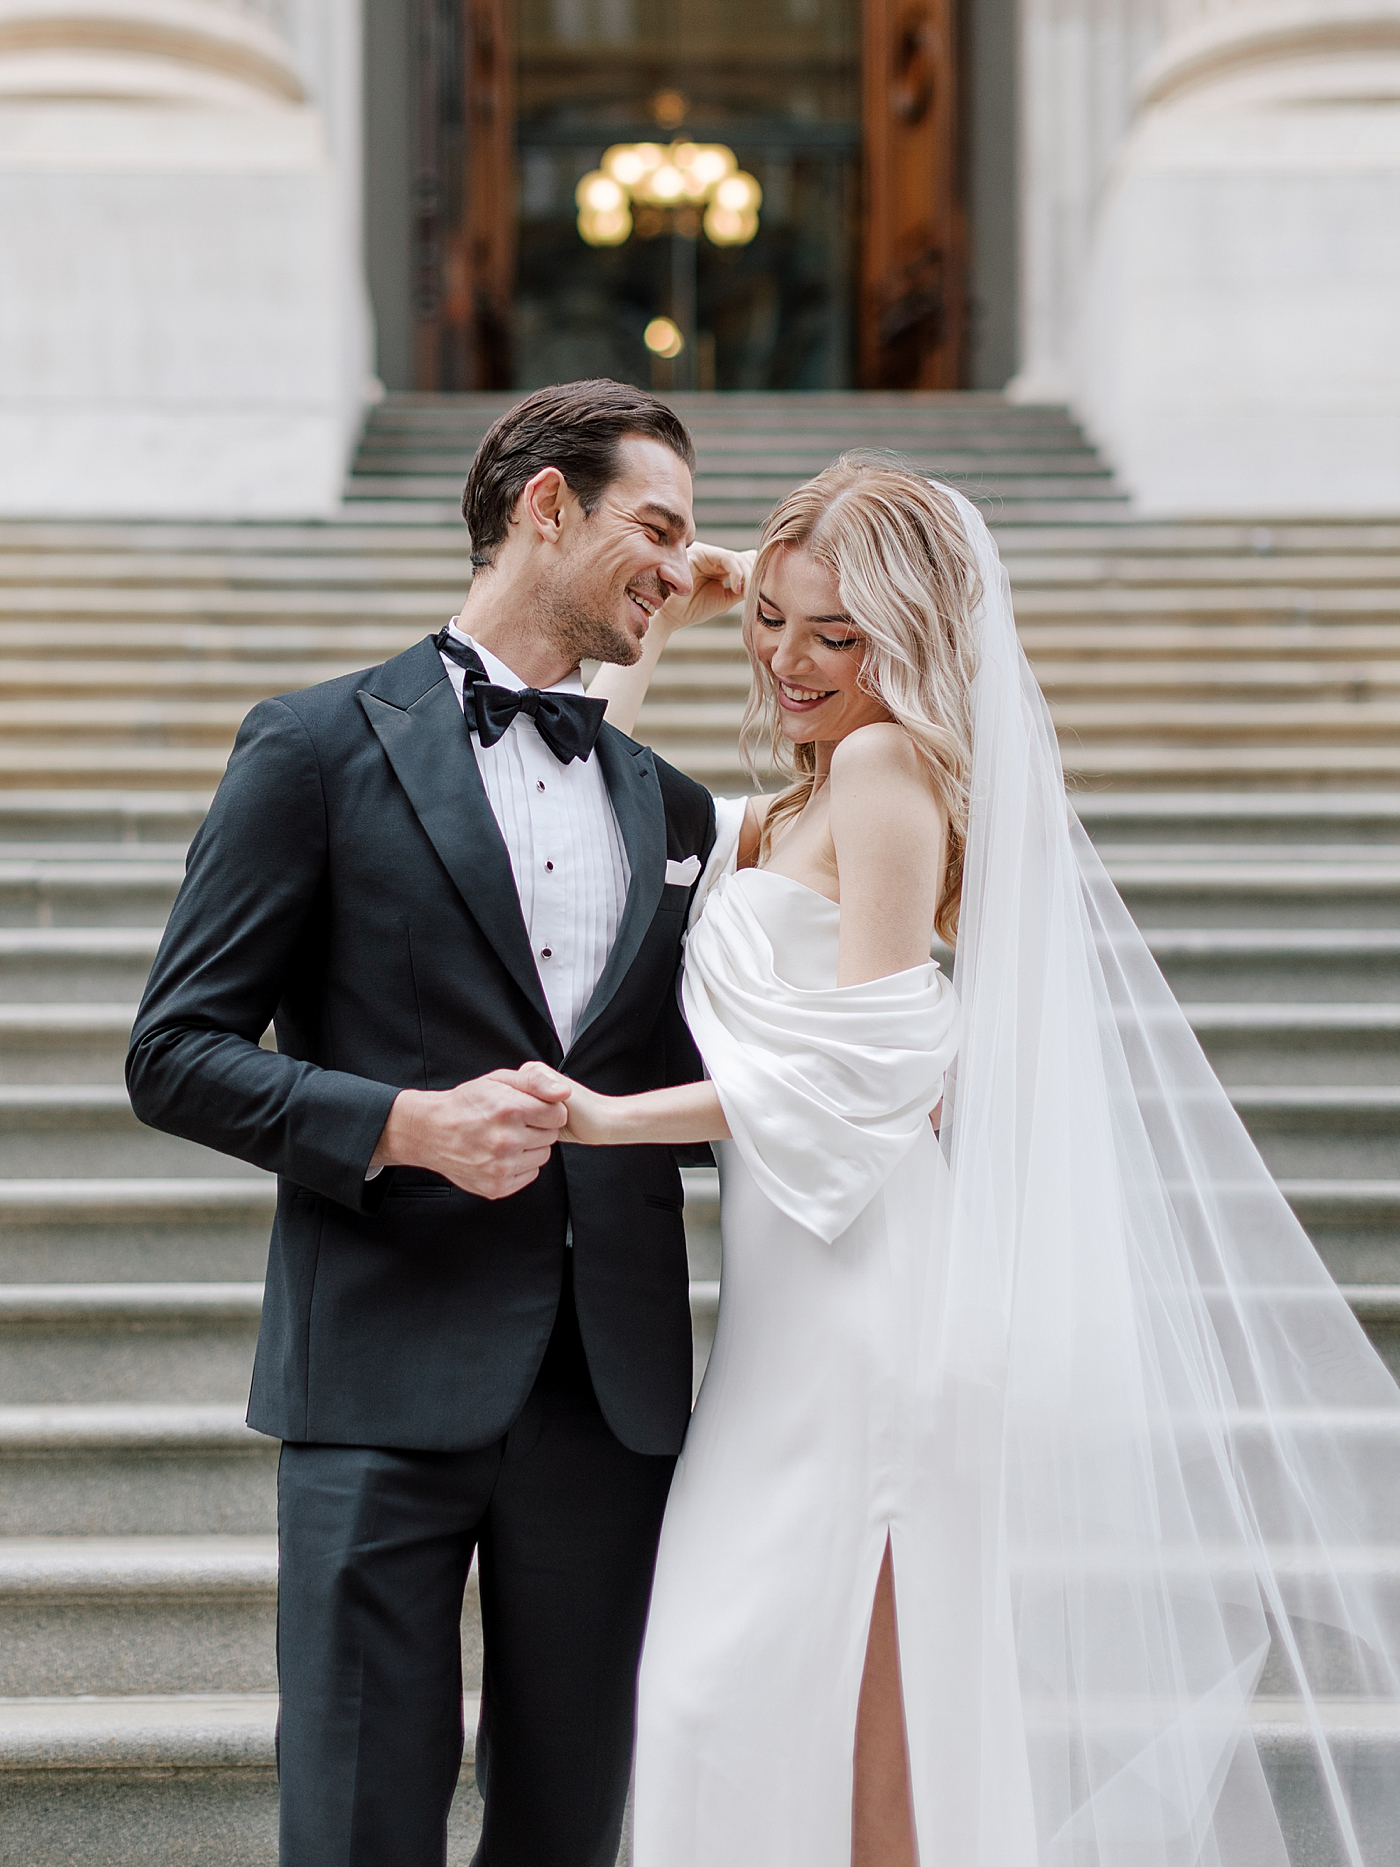 Playful bride and groom portraits in downtown NYC | Photo by Hope Helmuth Photography